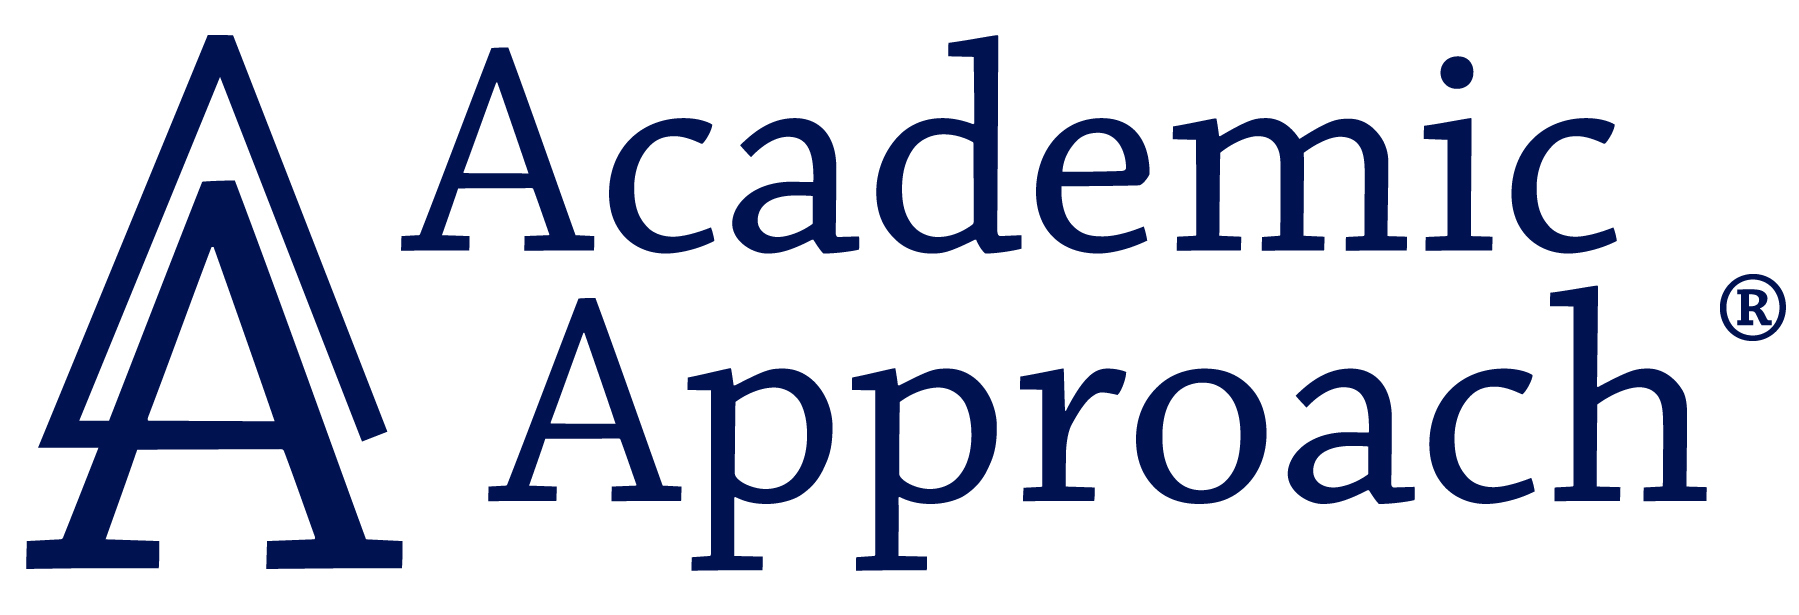 AcademicApproachLogo_Blue_Stacked_1799x615px.jpg